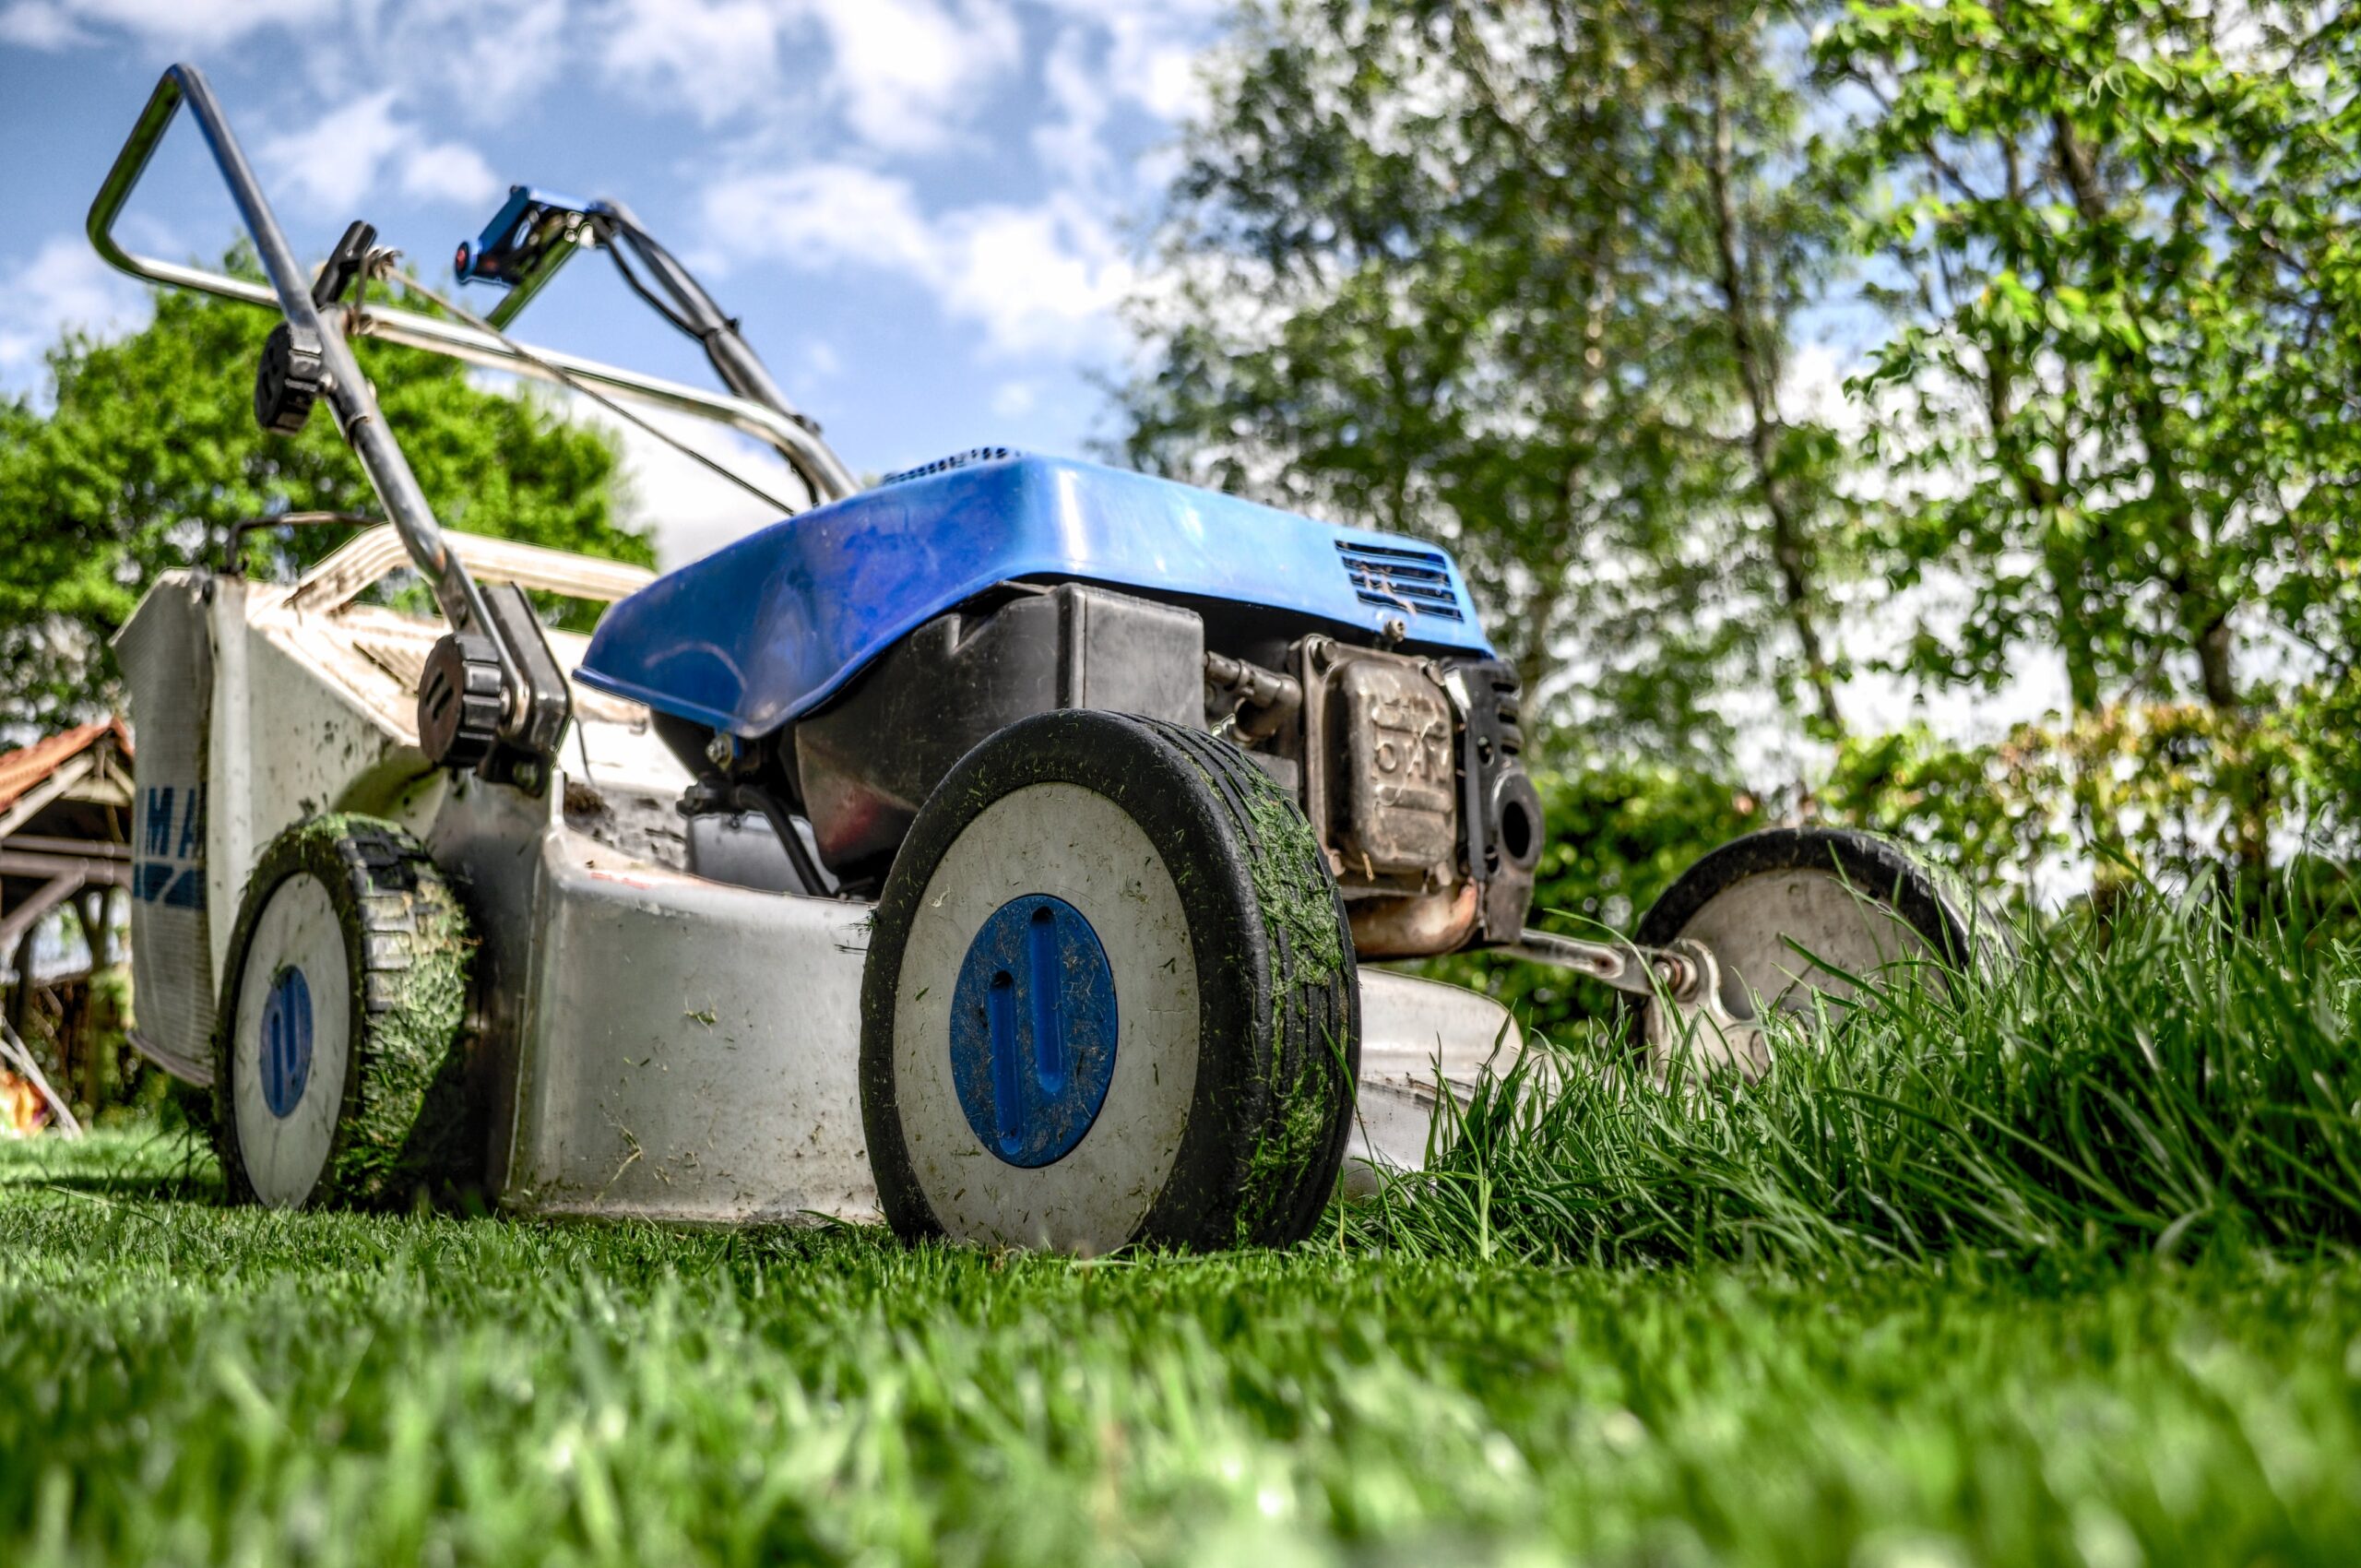 A garden lawnmower mowing grass clippings.